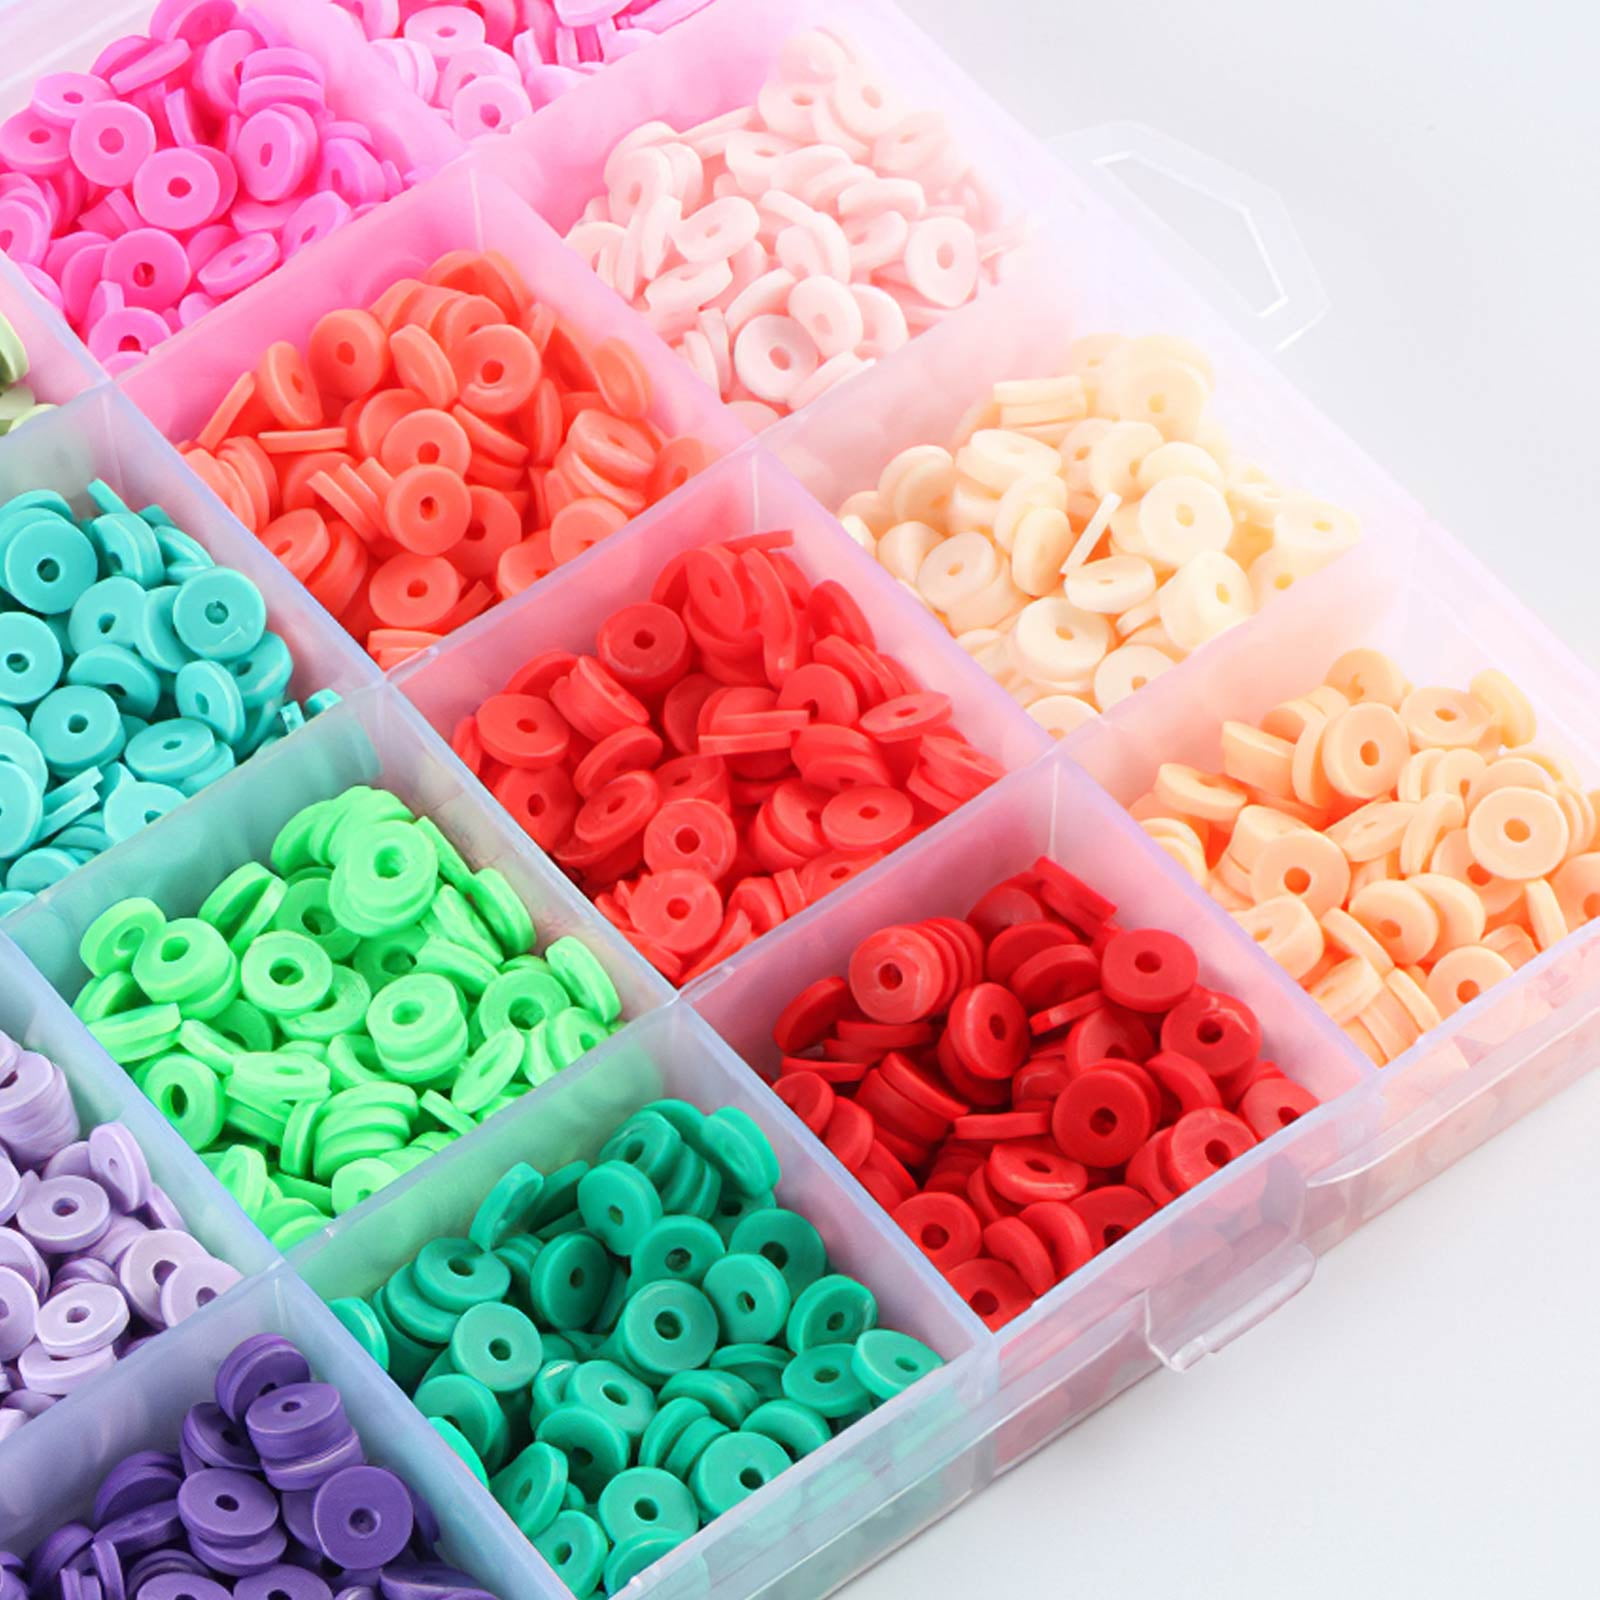 7200 Clay Beads Bracelet Making Kit,24 Colors Spacer Flat Beads